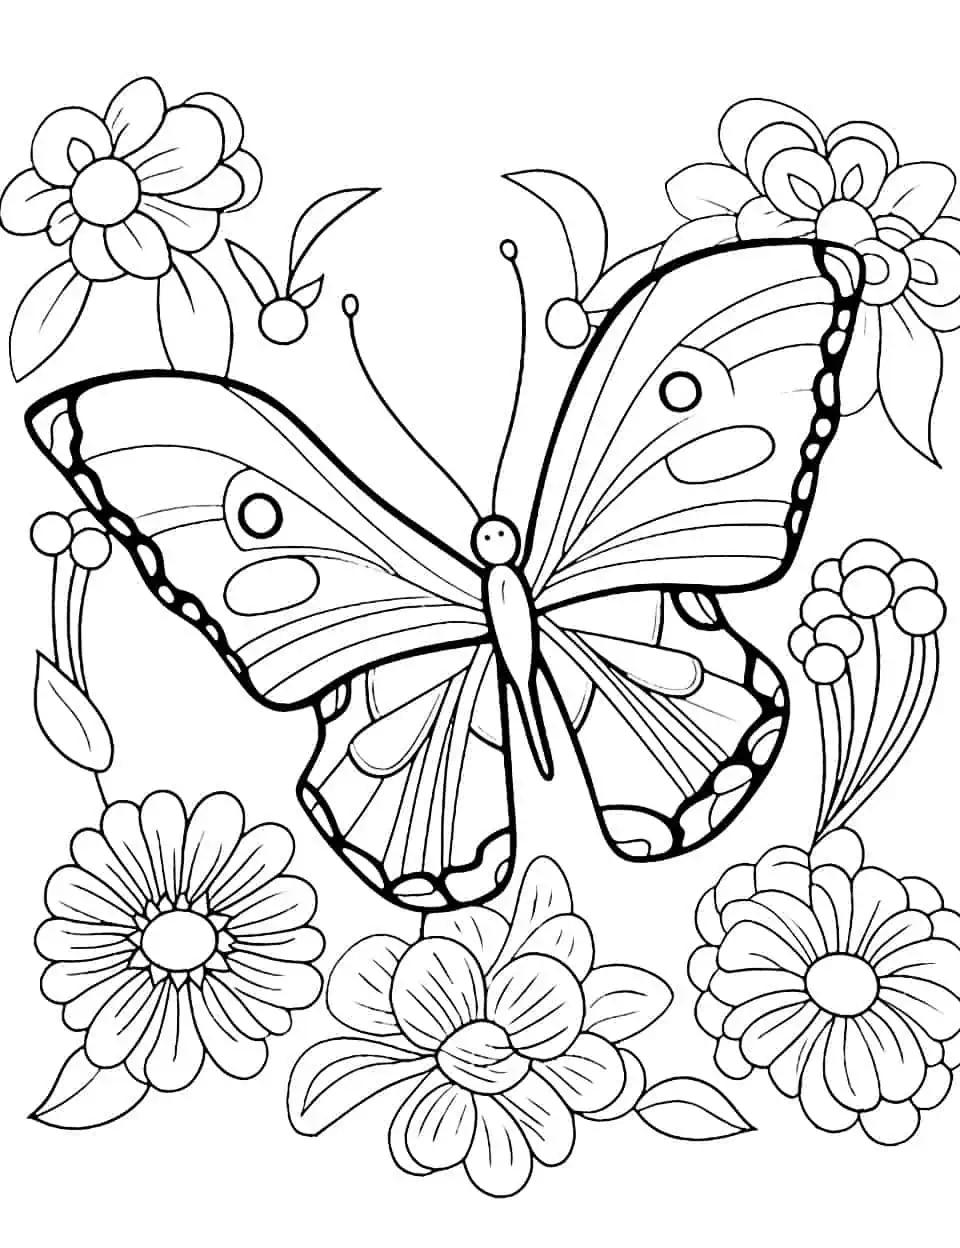 Flutterby Garden Butterfly Coloring Page - A coloring page featuring butterflies fluttering among a garden of diverse flowers.